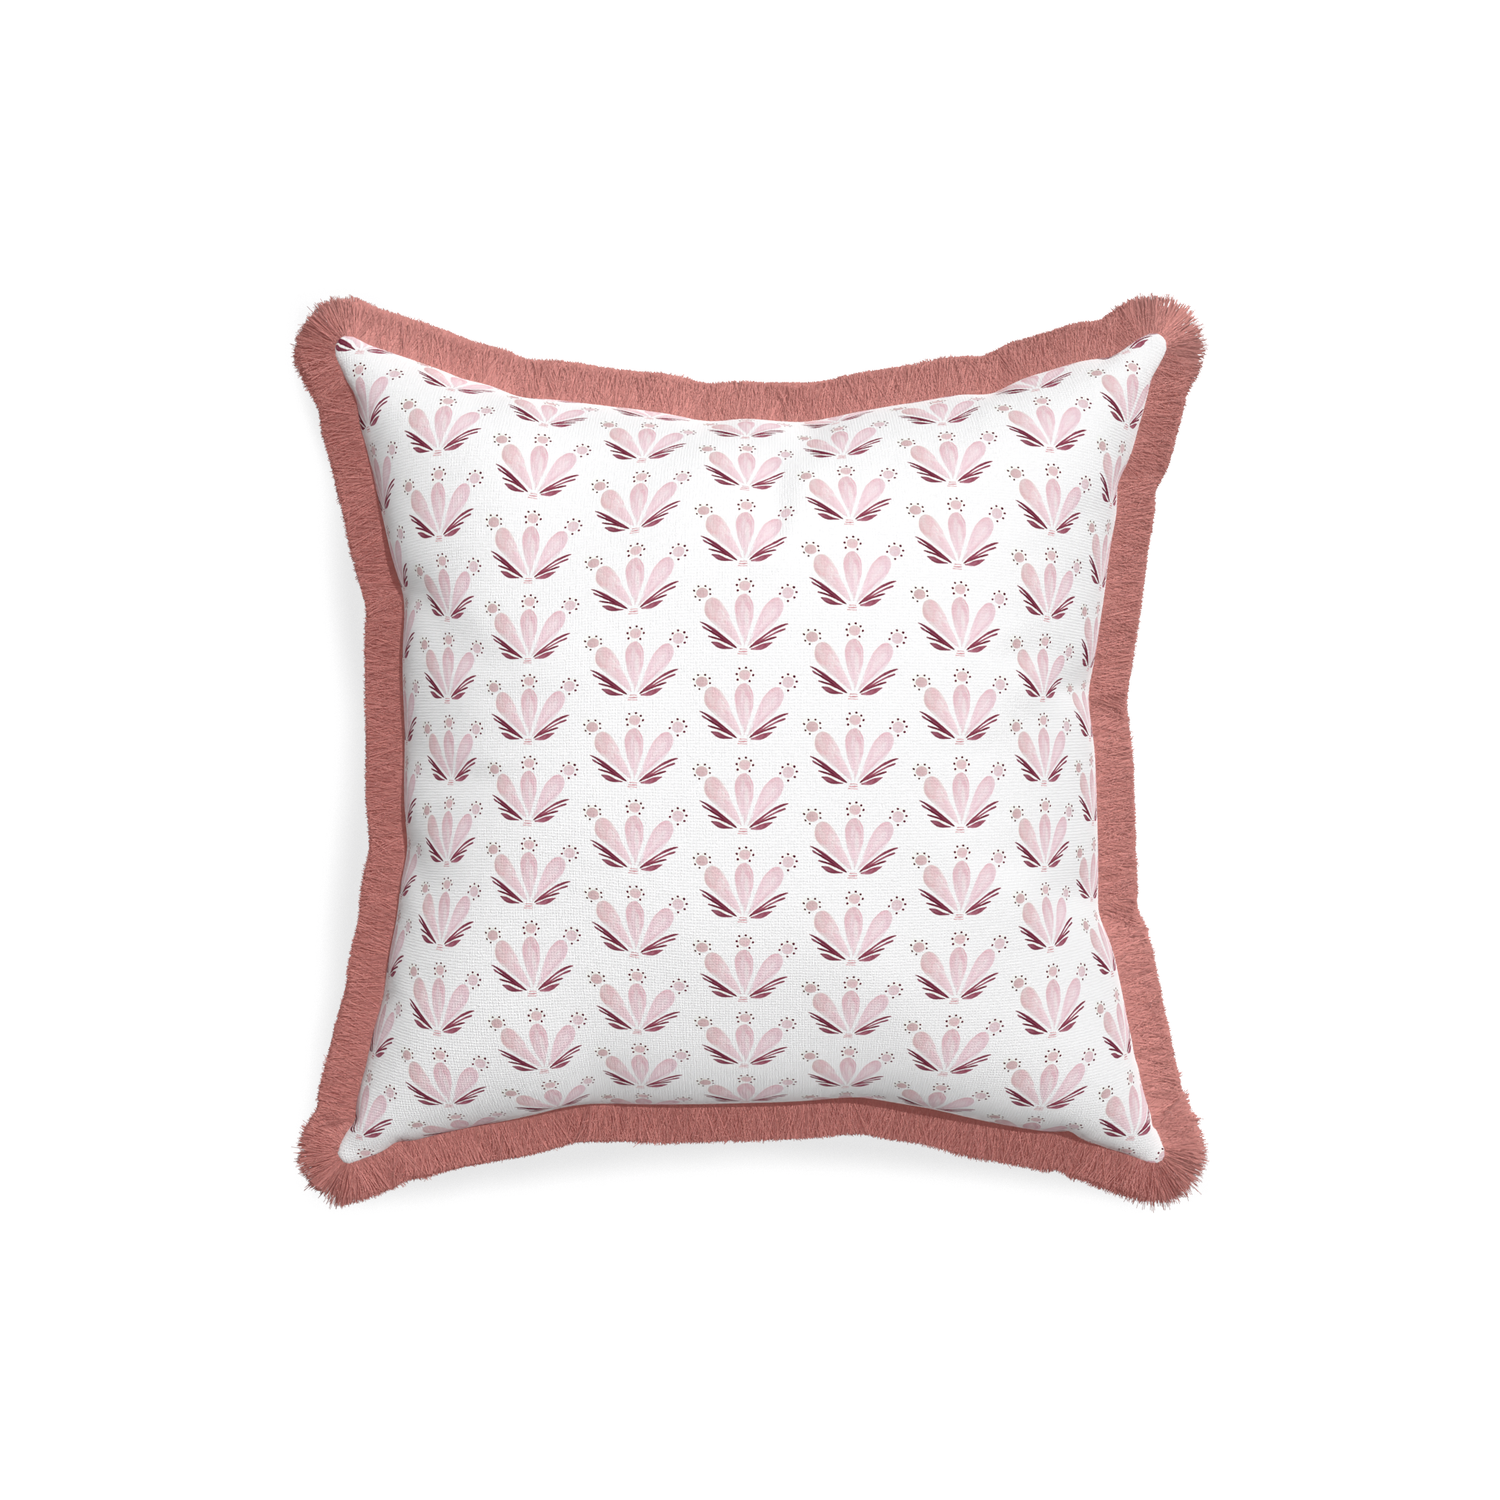 18-square serena pink custom pillow with d fringe on white background